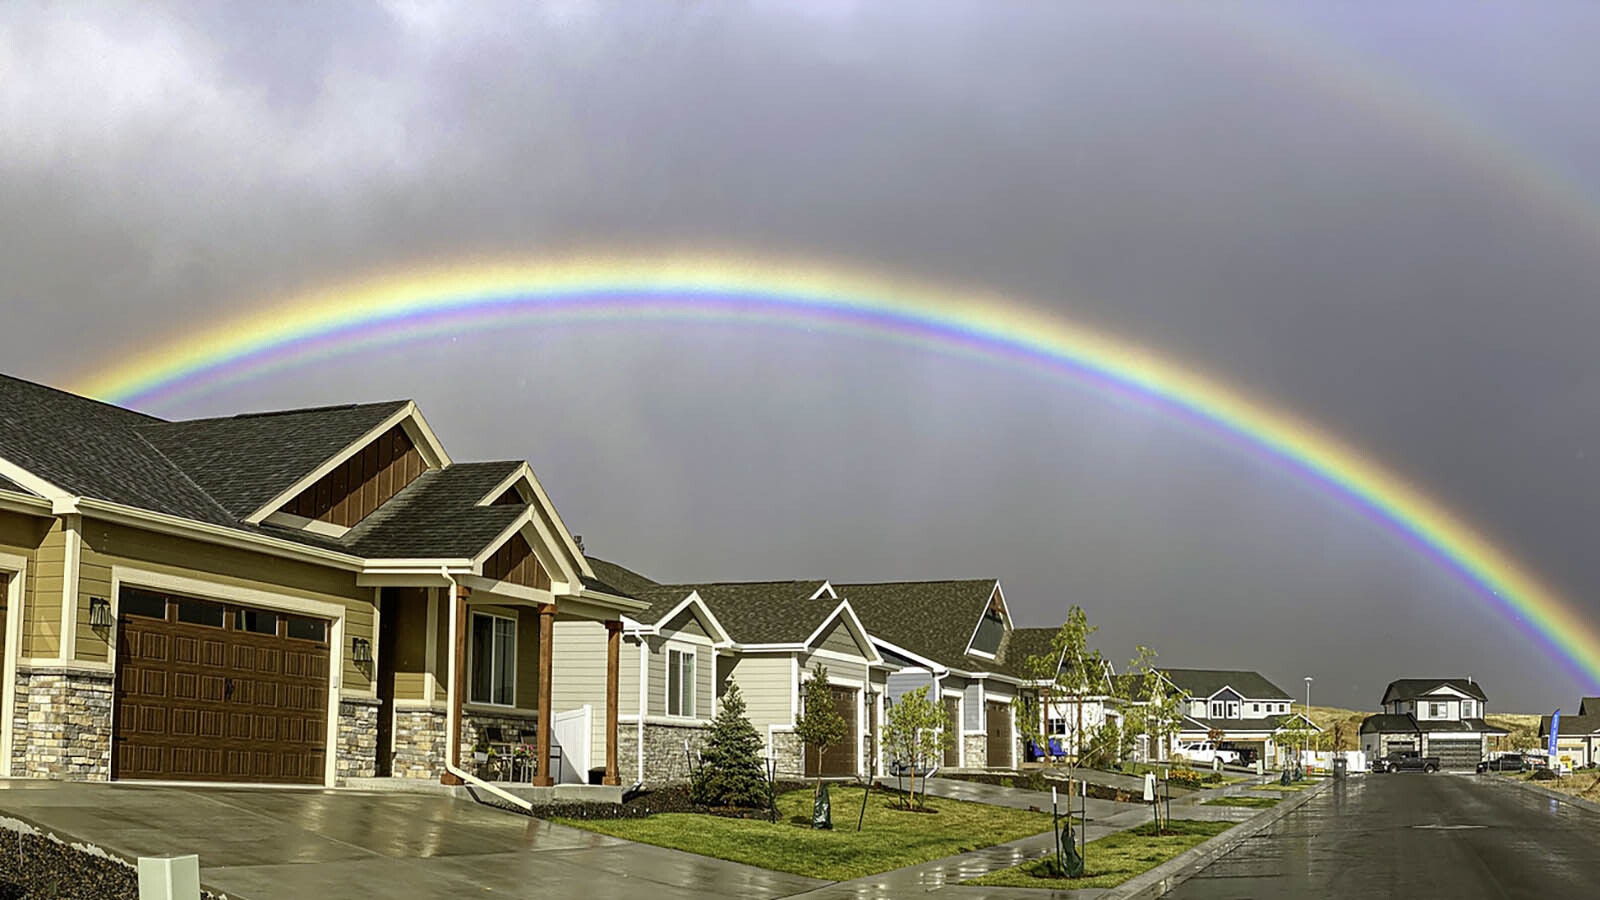 An afternoon of thunderstorms cleared to reveal a supernumerary rainbow "as bright as I have ever seen," Jan Curtis said.